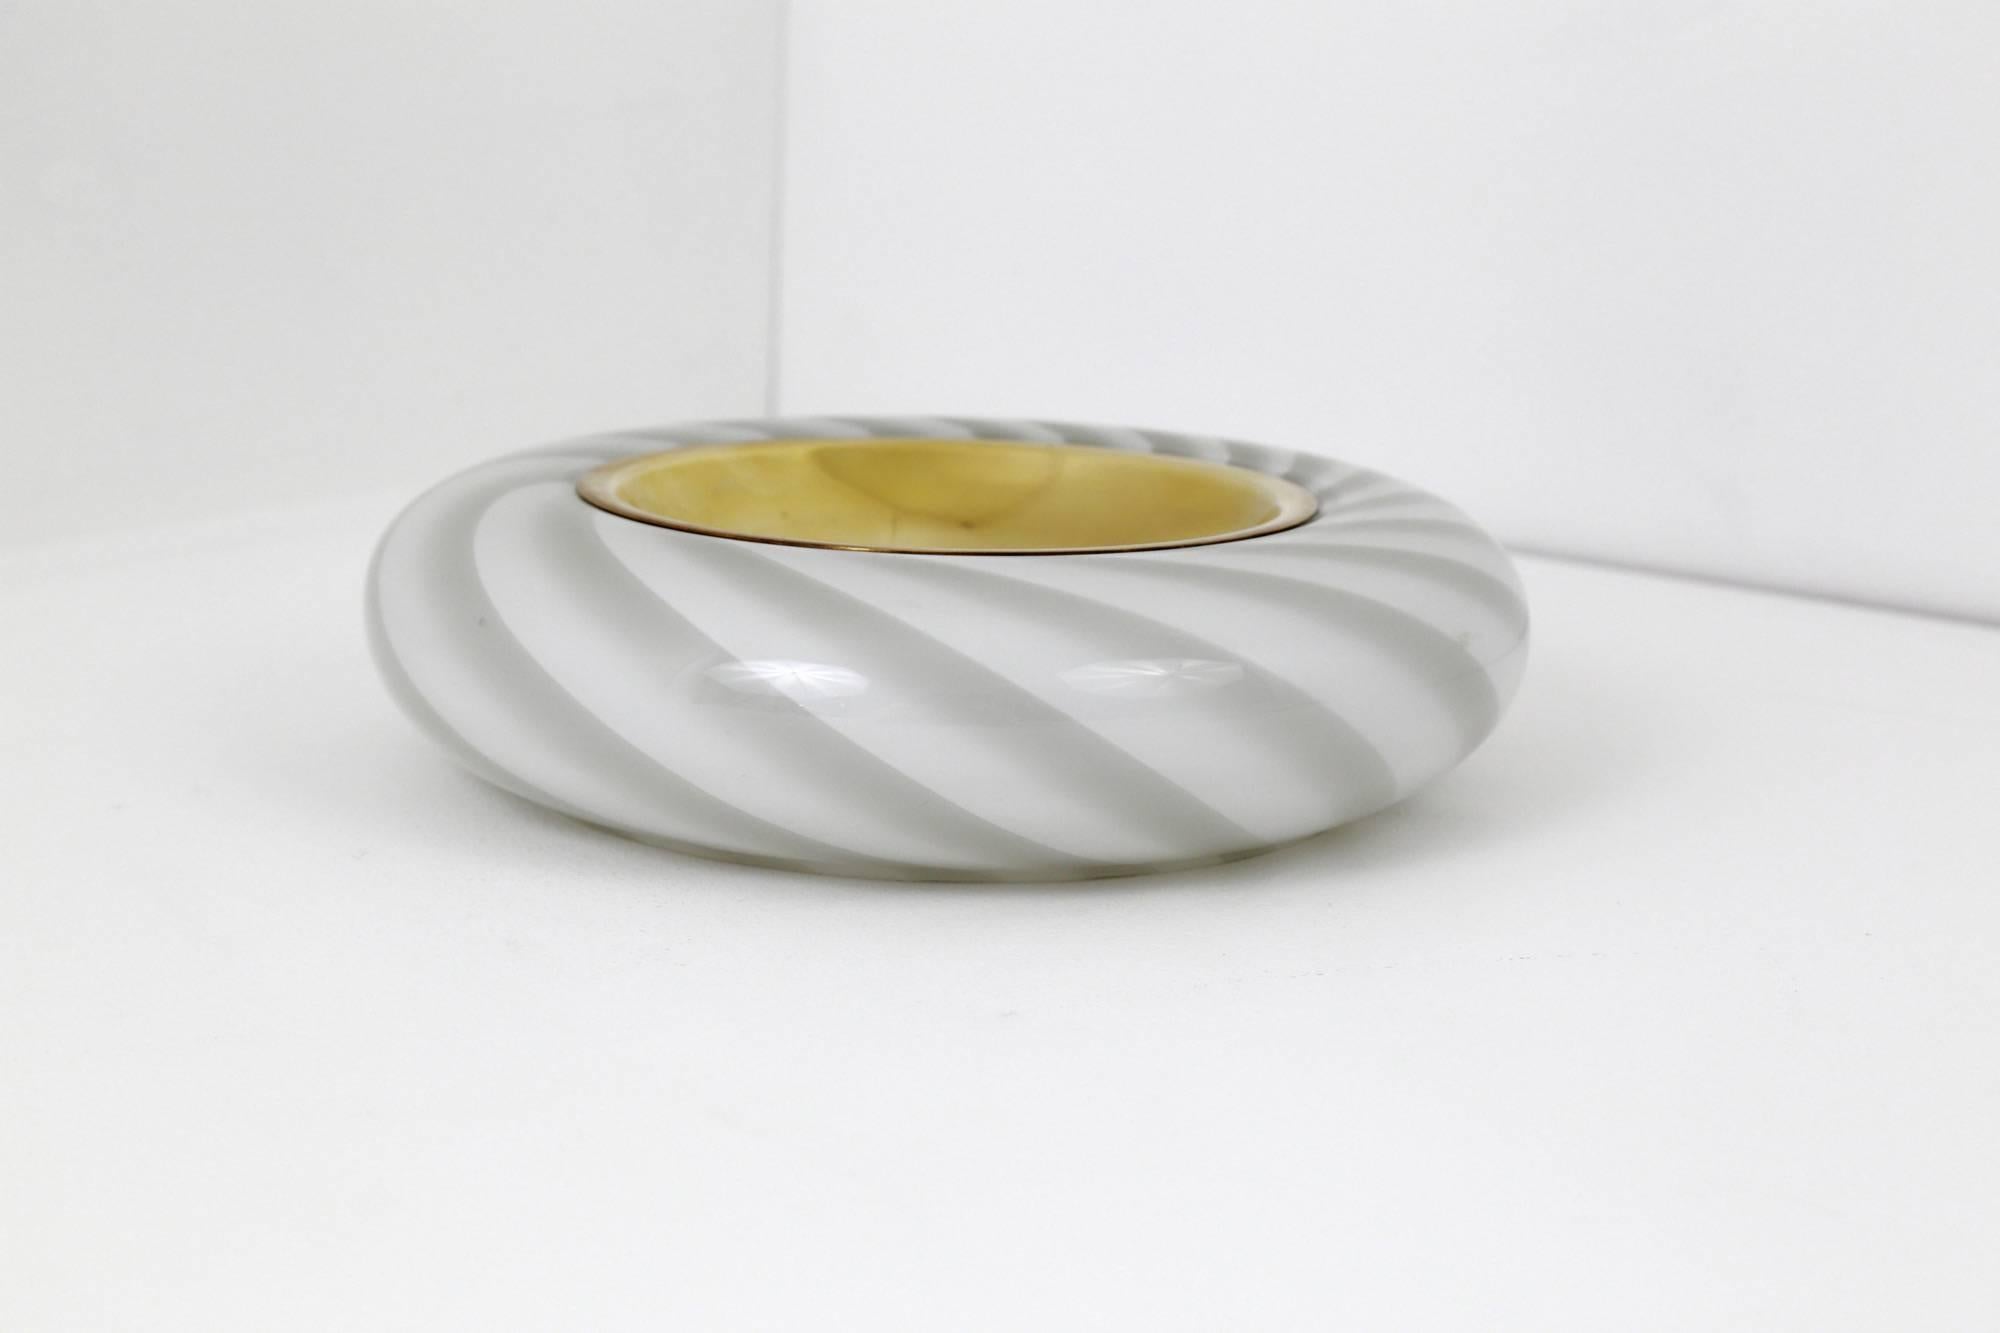 A wonderful, white and grey, Murano glass bowl with a polished brass insert at its centre. Designed by Tommaso Barbi, during the 1970s, it is signed 'TB/Made in Italy' on the underside.